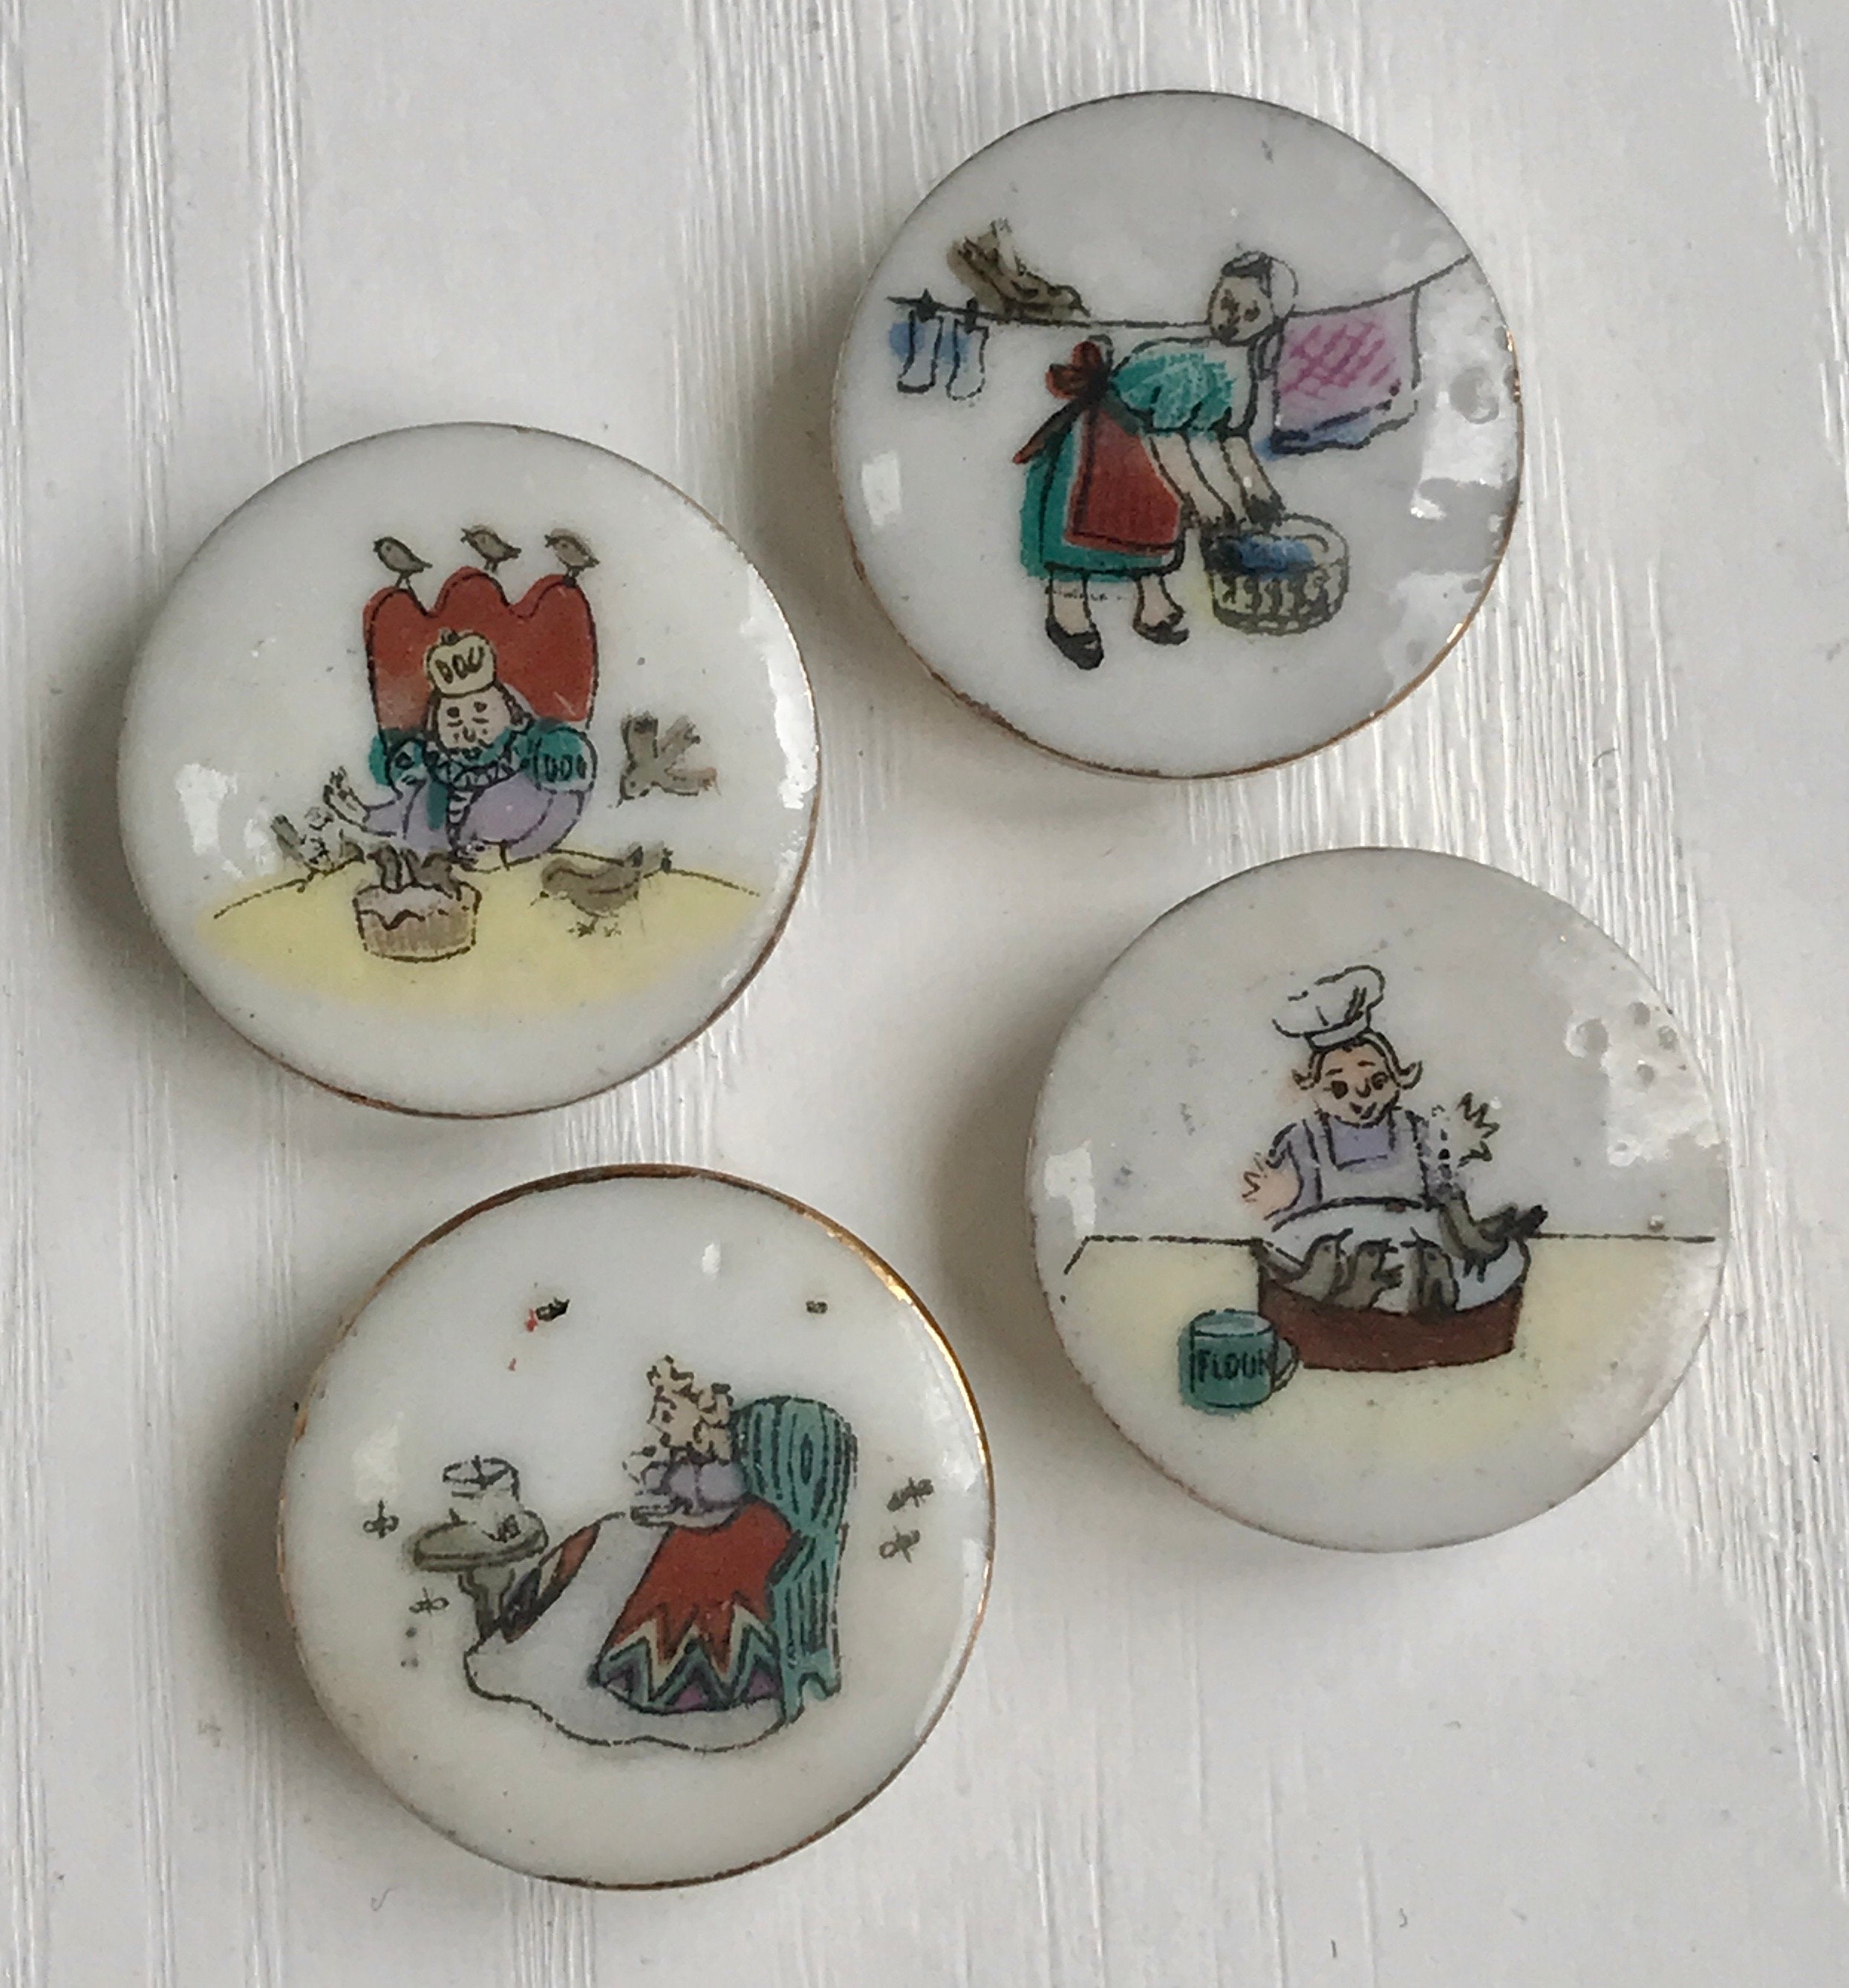 12 Vintage Christmas Buttons - Ceramic turned into Button Covers (BC07)